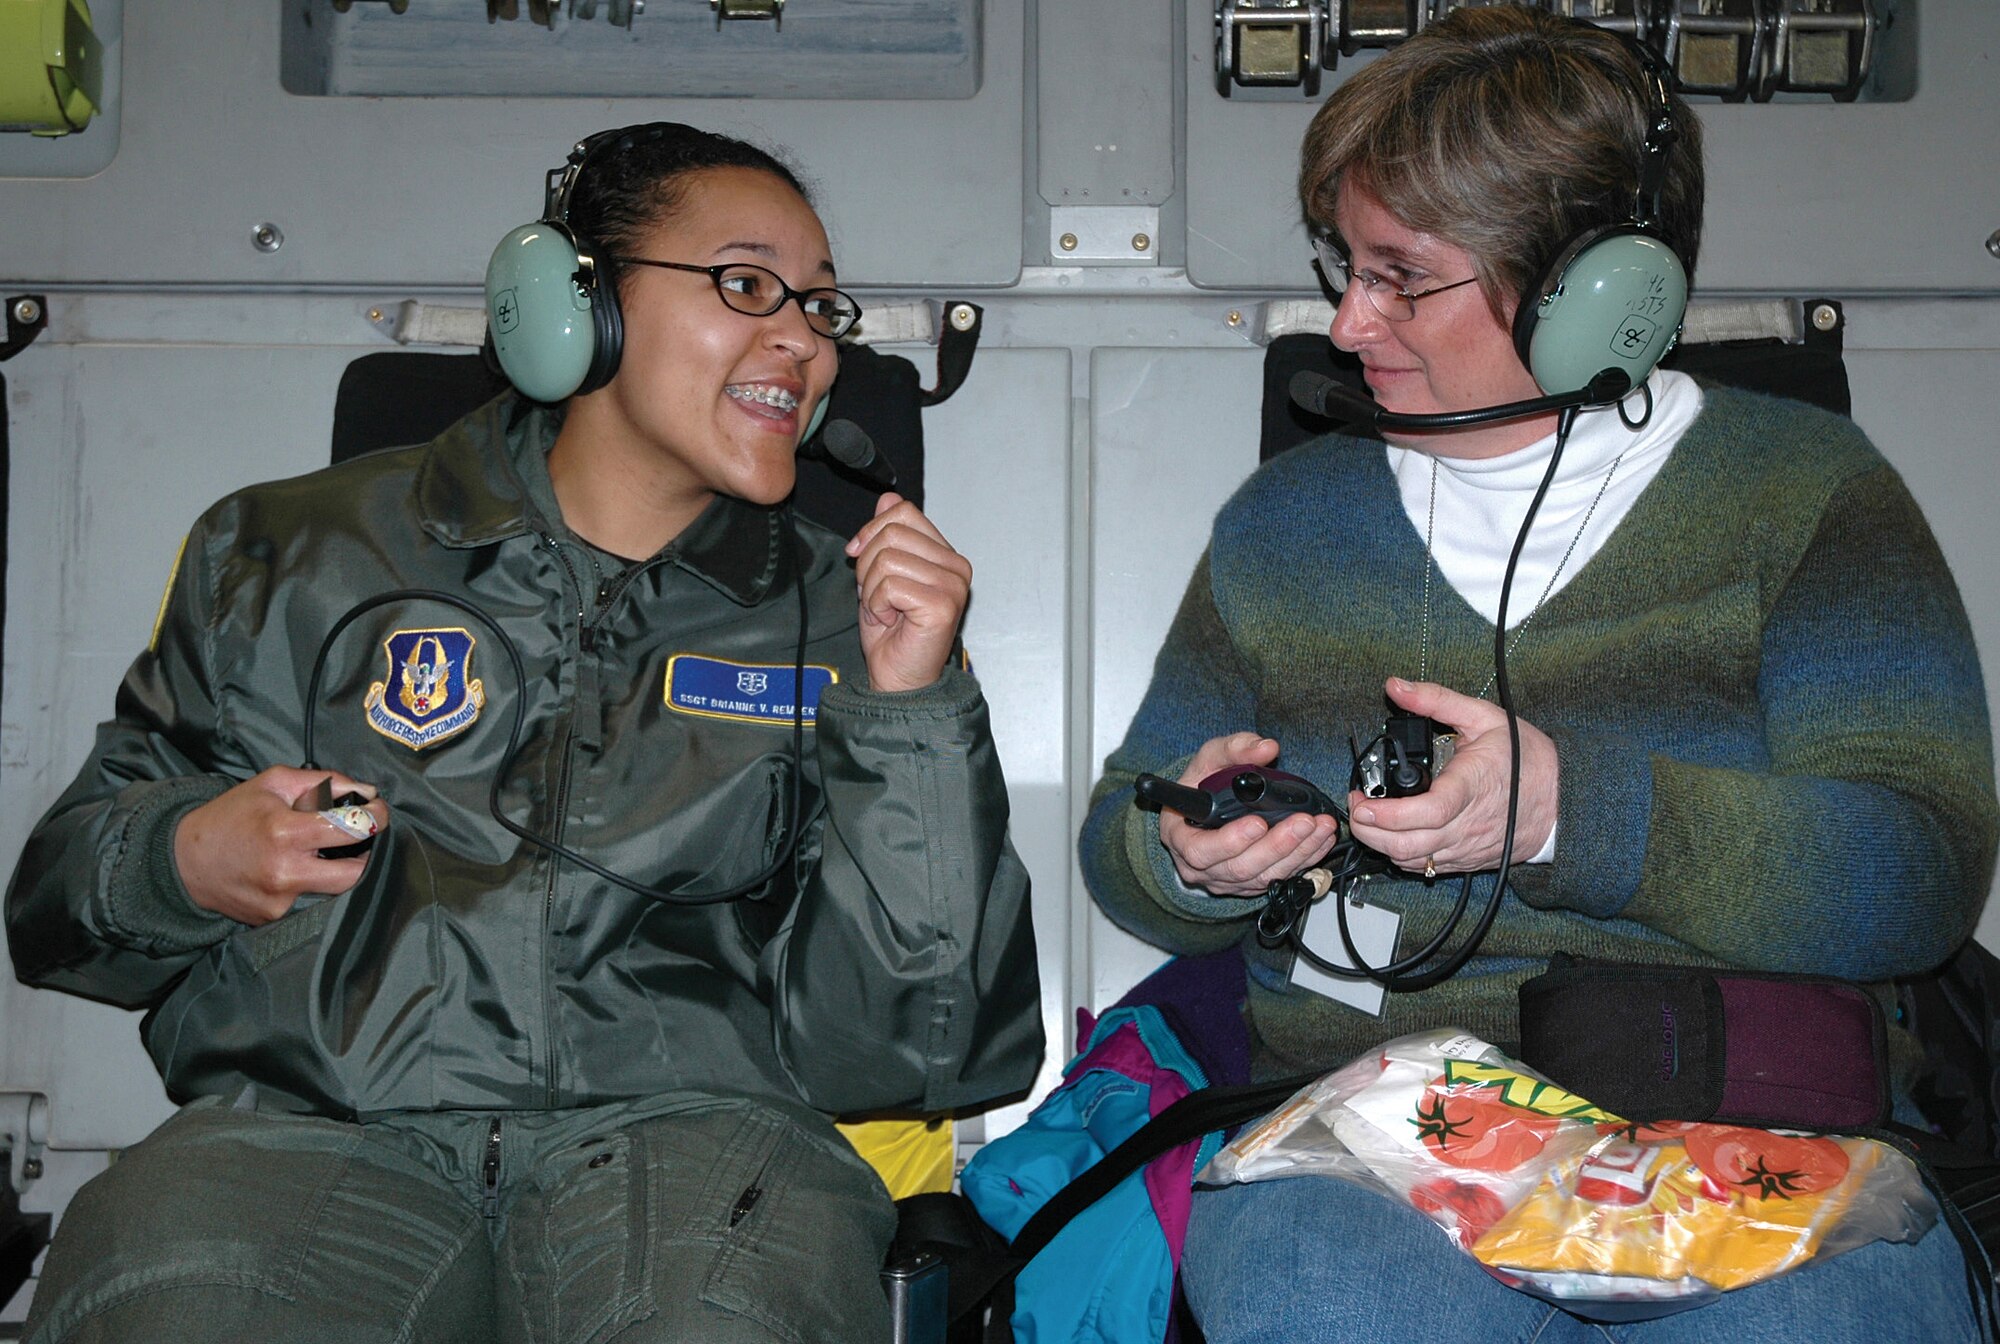 McCHORD AIR FORCE BASE, Wash. - Staff Sgt. Brianne Rembert, left, talks through a headset with Mary Dearth during the 446th Airlift Wing's Employer Orientation Day flight March 31.  Ms. Dearth is Sergeant Rembert's civilian manager at the Multicare Medical Center in Tacoma. Sergeant Rembert is a Reservist with the 446th Aeromedical Staging Squadron. U.S. Air Force photo/Senior Airman Desiree Kiliz